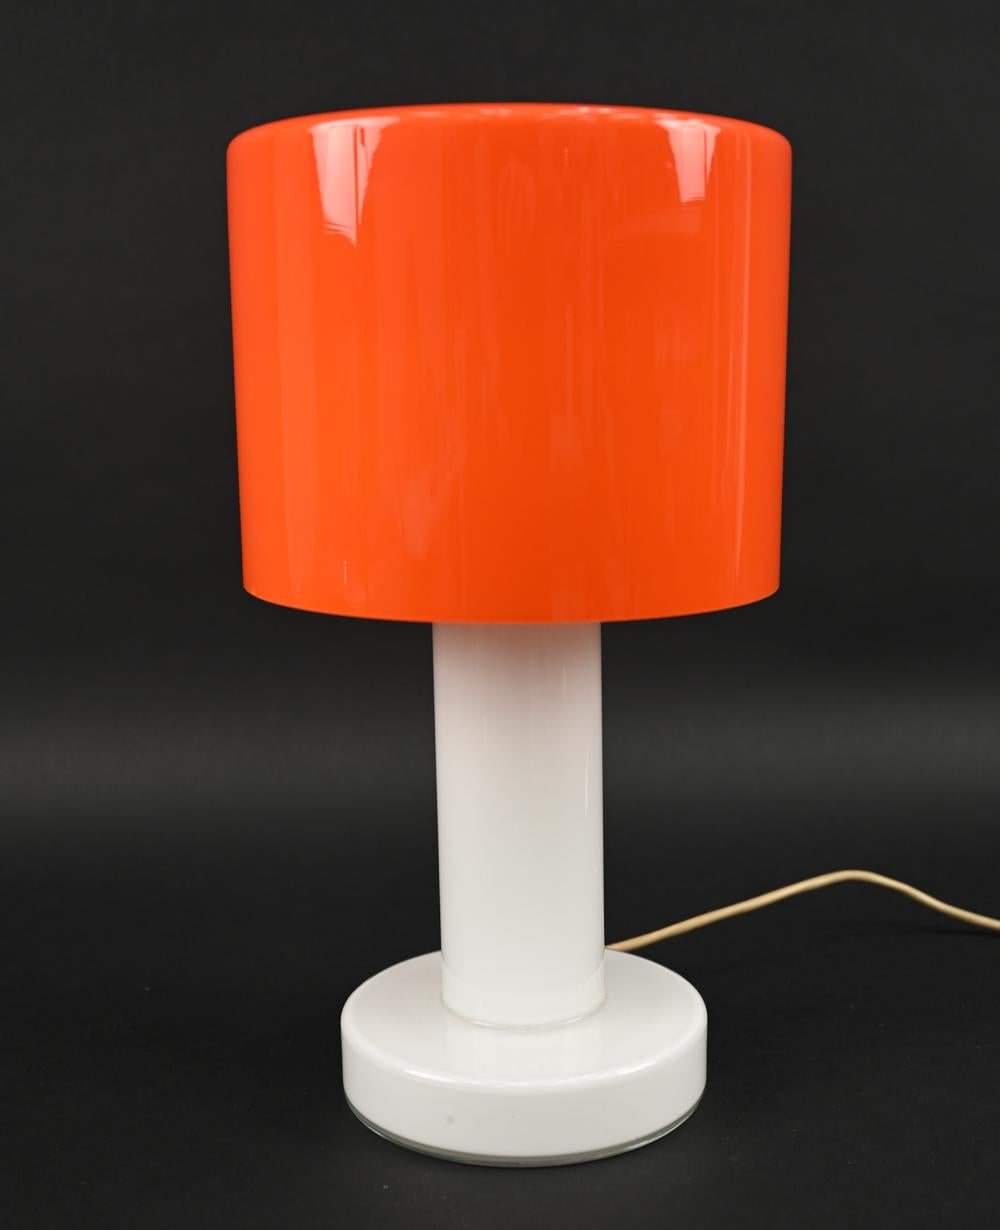 Add a fun pop of color to your interior with this playful table lamp designed by Michael Bang for Holmegaard. This model Rolino-Maxi lamp features a striking orange glass shade with a white cased glass base. 
With Holmegaard label underneath.